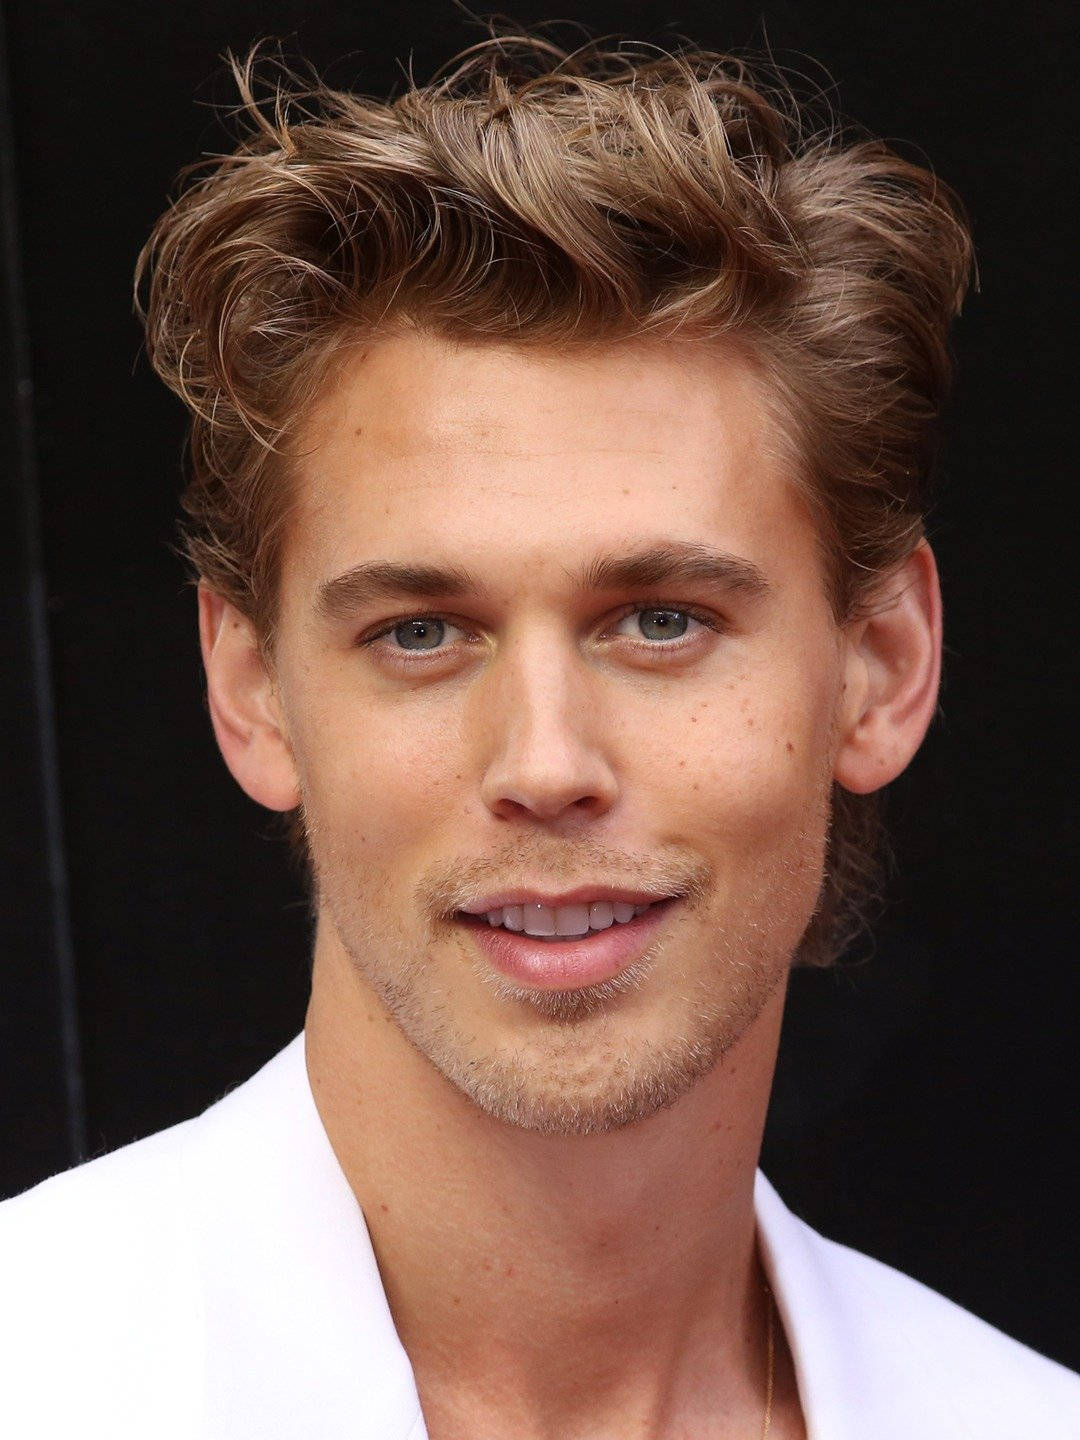 "Austin Butler flaunting his creative stubble look in a high-resolution image." Wallpaper